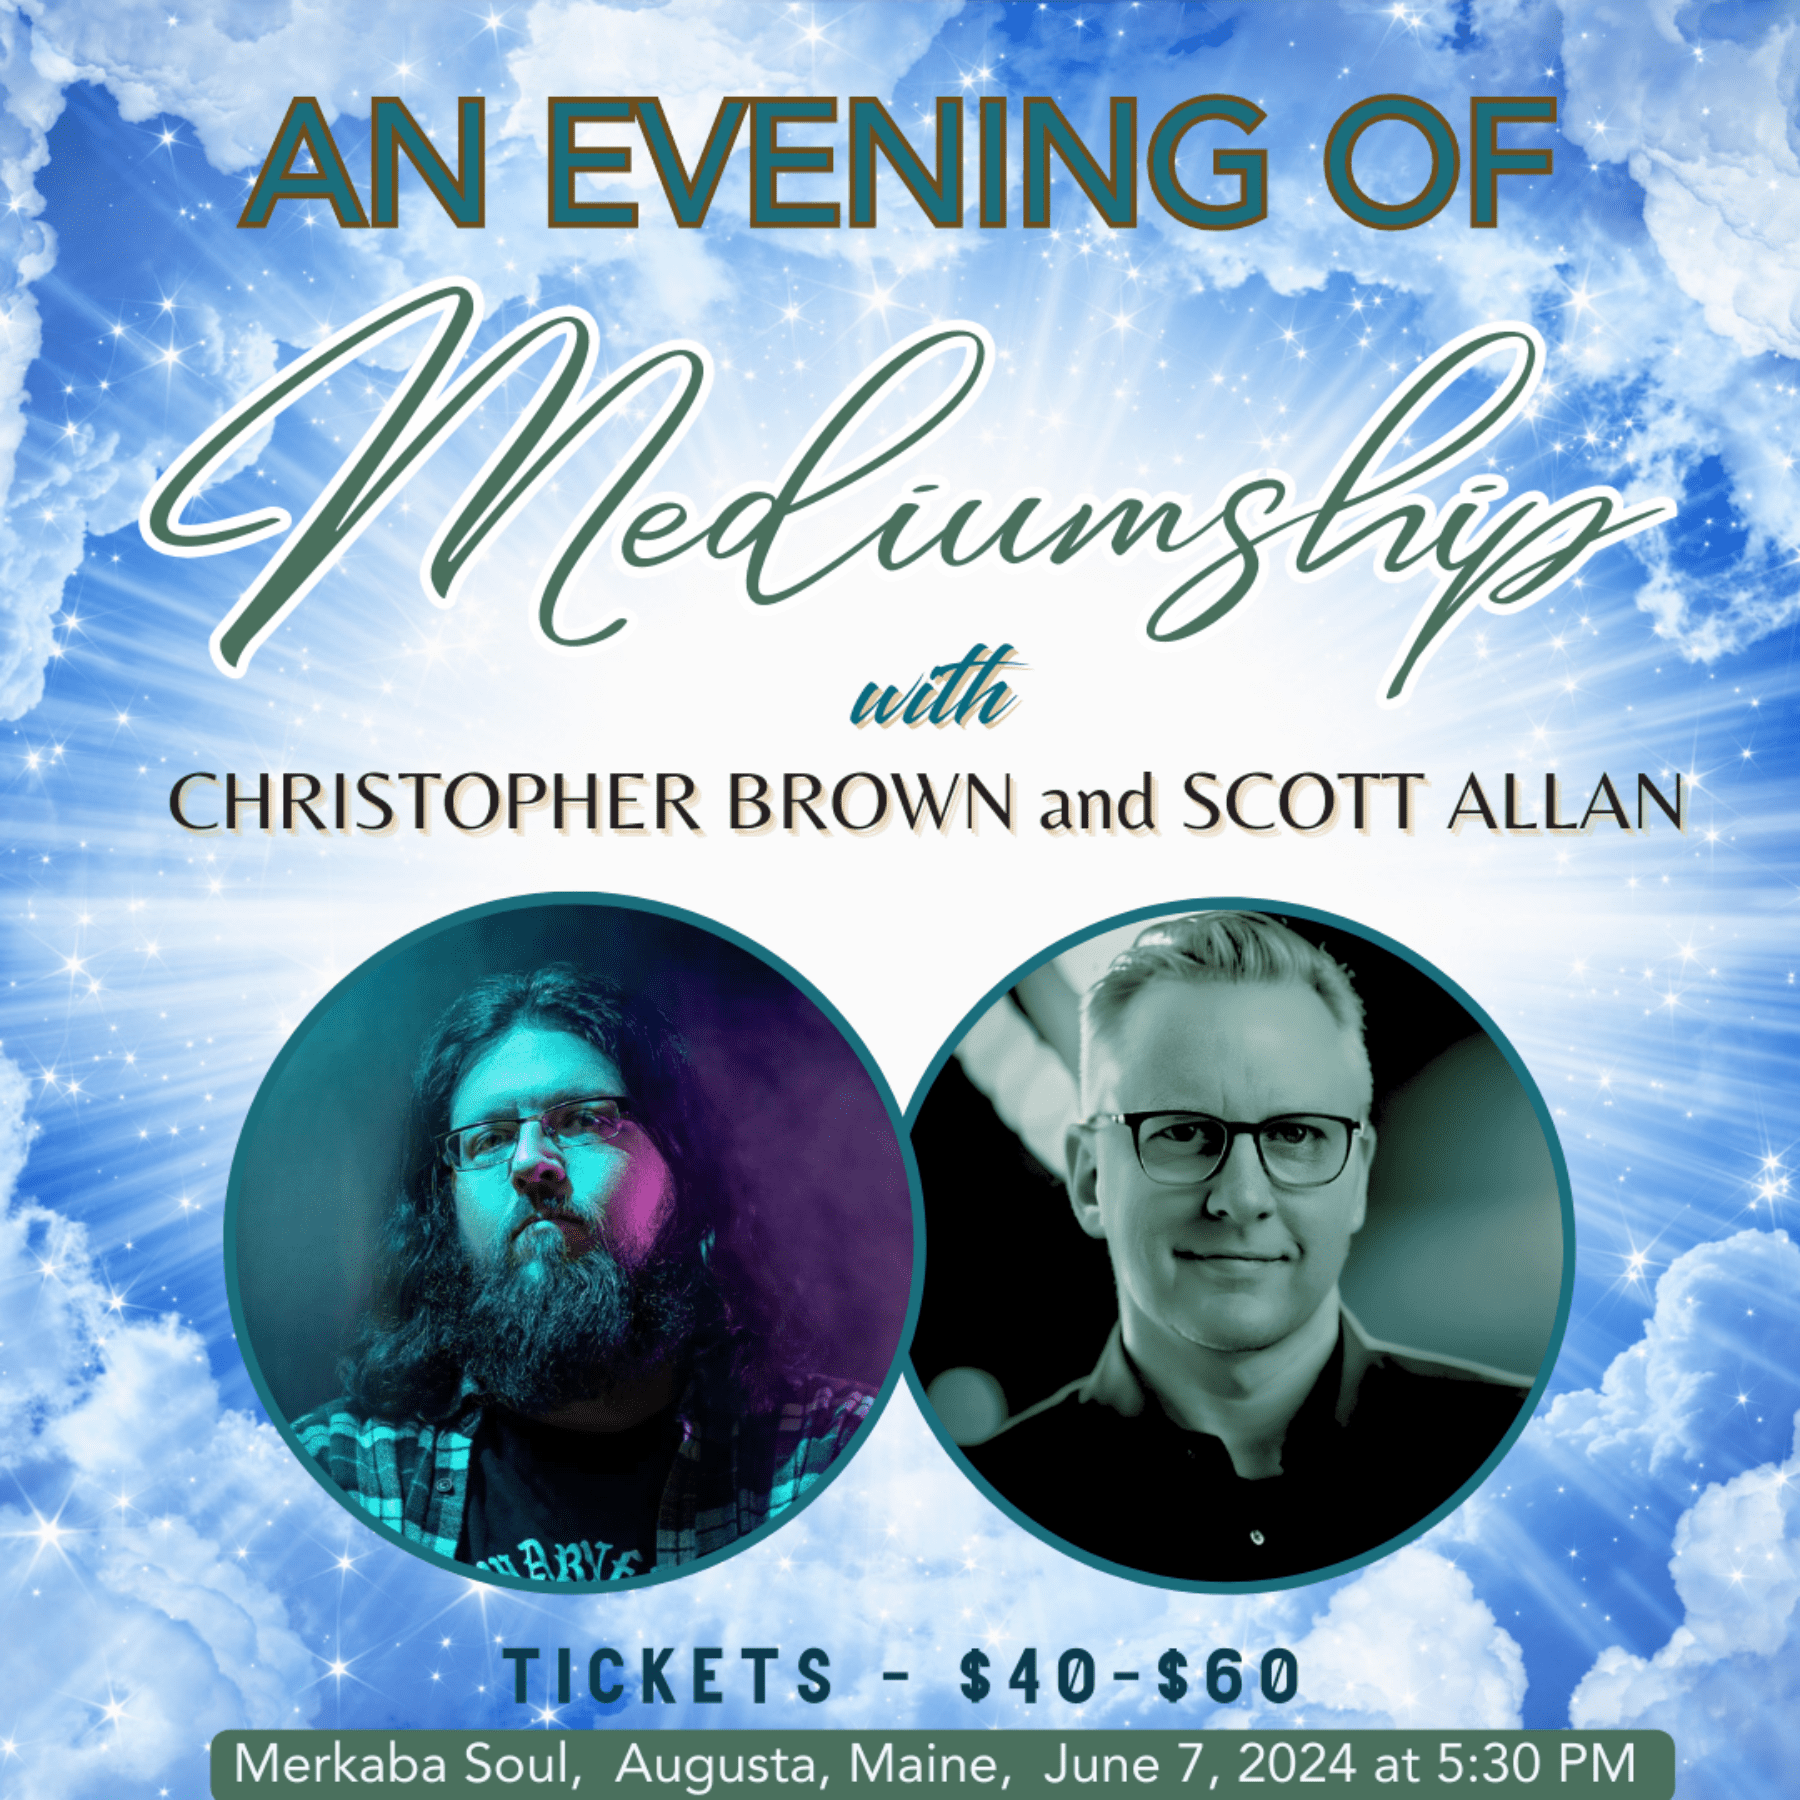 An Evening Of Mediumship in Augusta, Maine 6/7/2024 at 5:30 PM